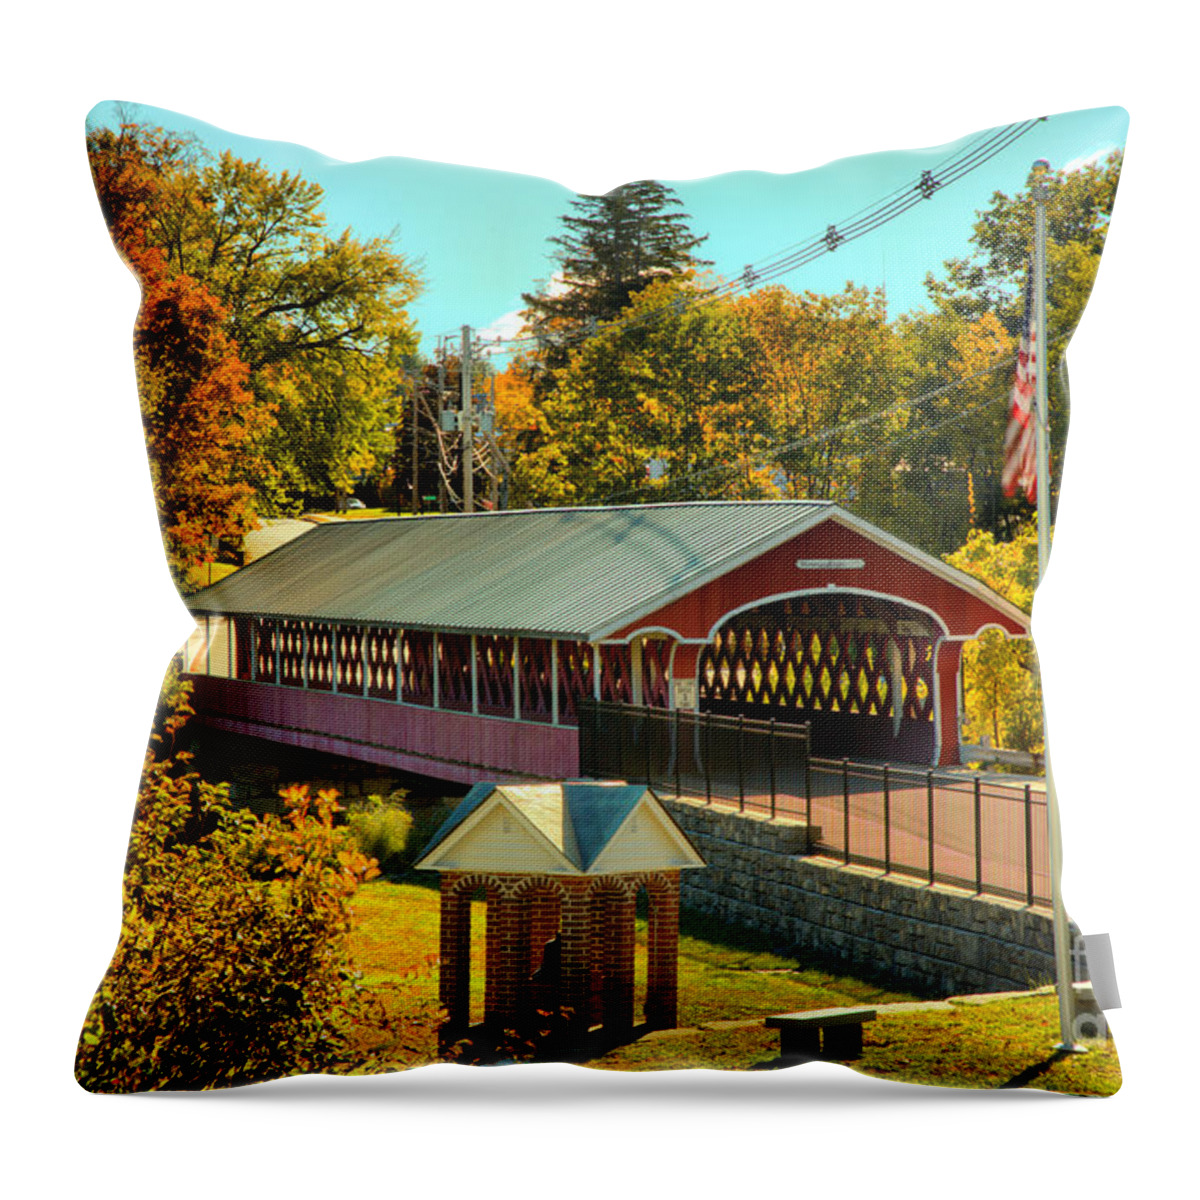 Thompson Covered Bridge Throw Pillow featuring the photograph West Swanzey Main Street Covered Bridge by Adam Jewell